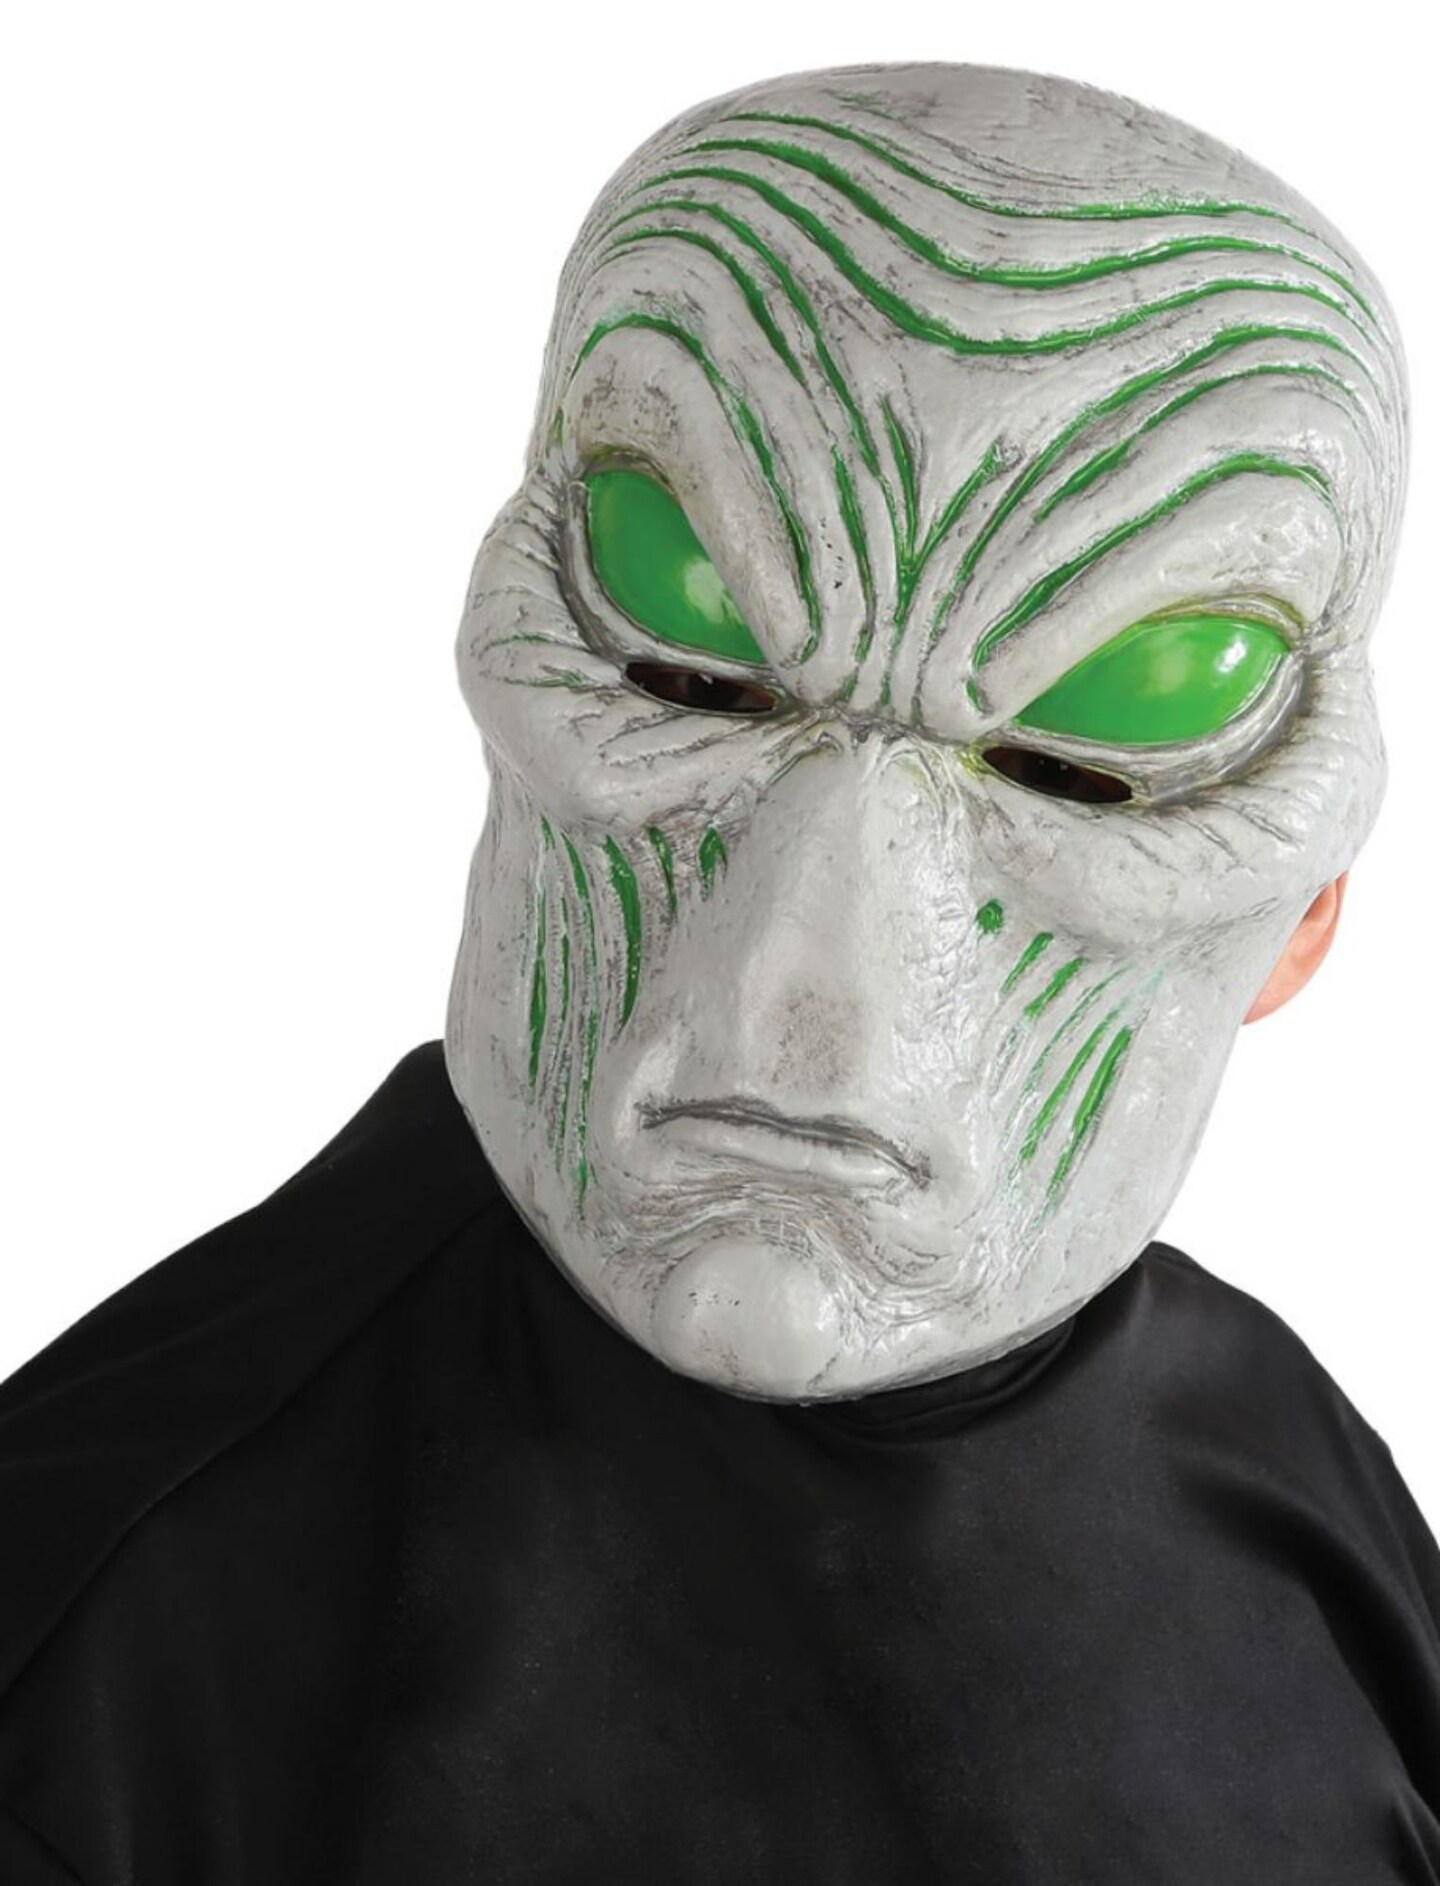 The Costume Center Gray and Green Glowing Alien Unisex Adult Halloween Mask Costume Accessory - One Size